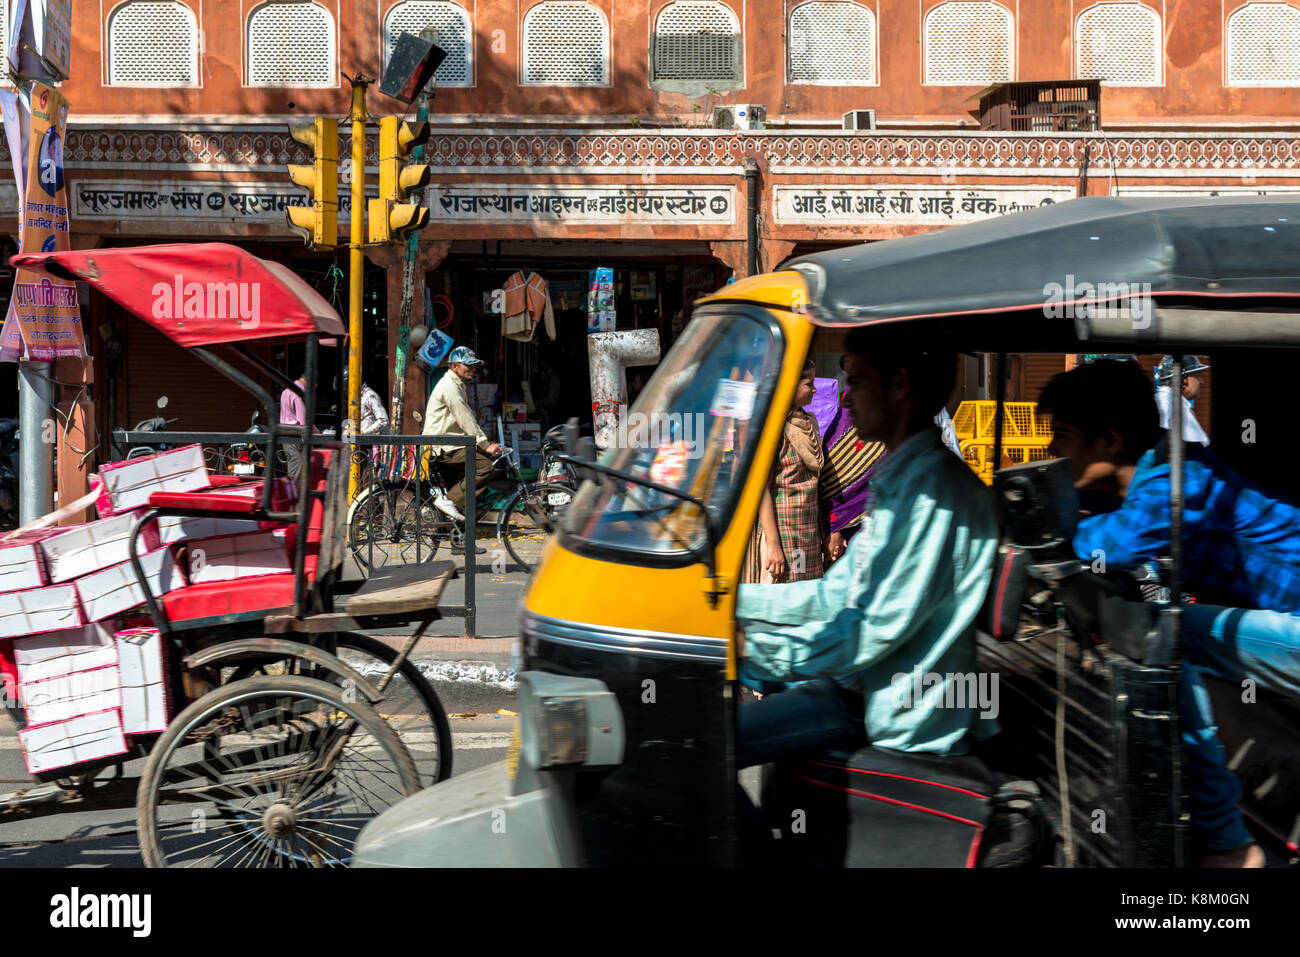 JAIPUR, RAJASTHAN, INDIA - MARCH 11, 2016: Horizontal picture of crowded streets full of rickshaw, motorcycle, people and tuk tuk in Jaipur, known as  Stock Photo